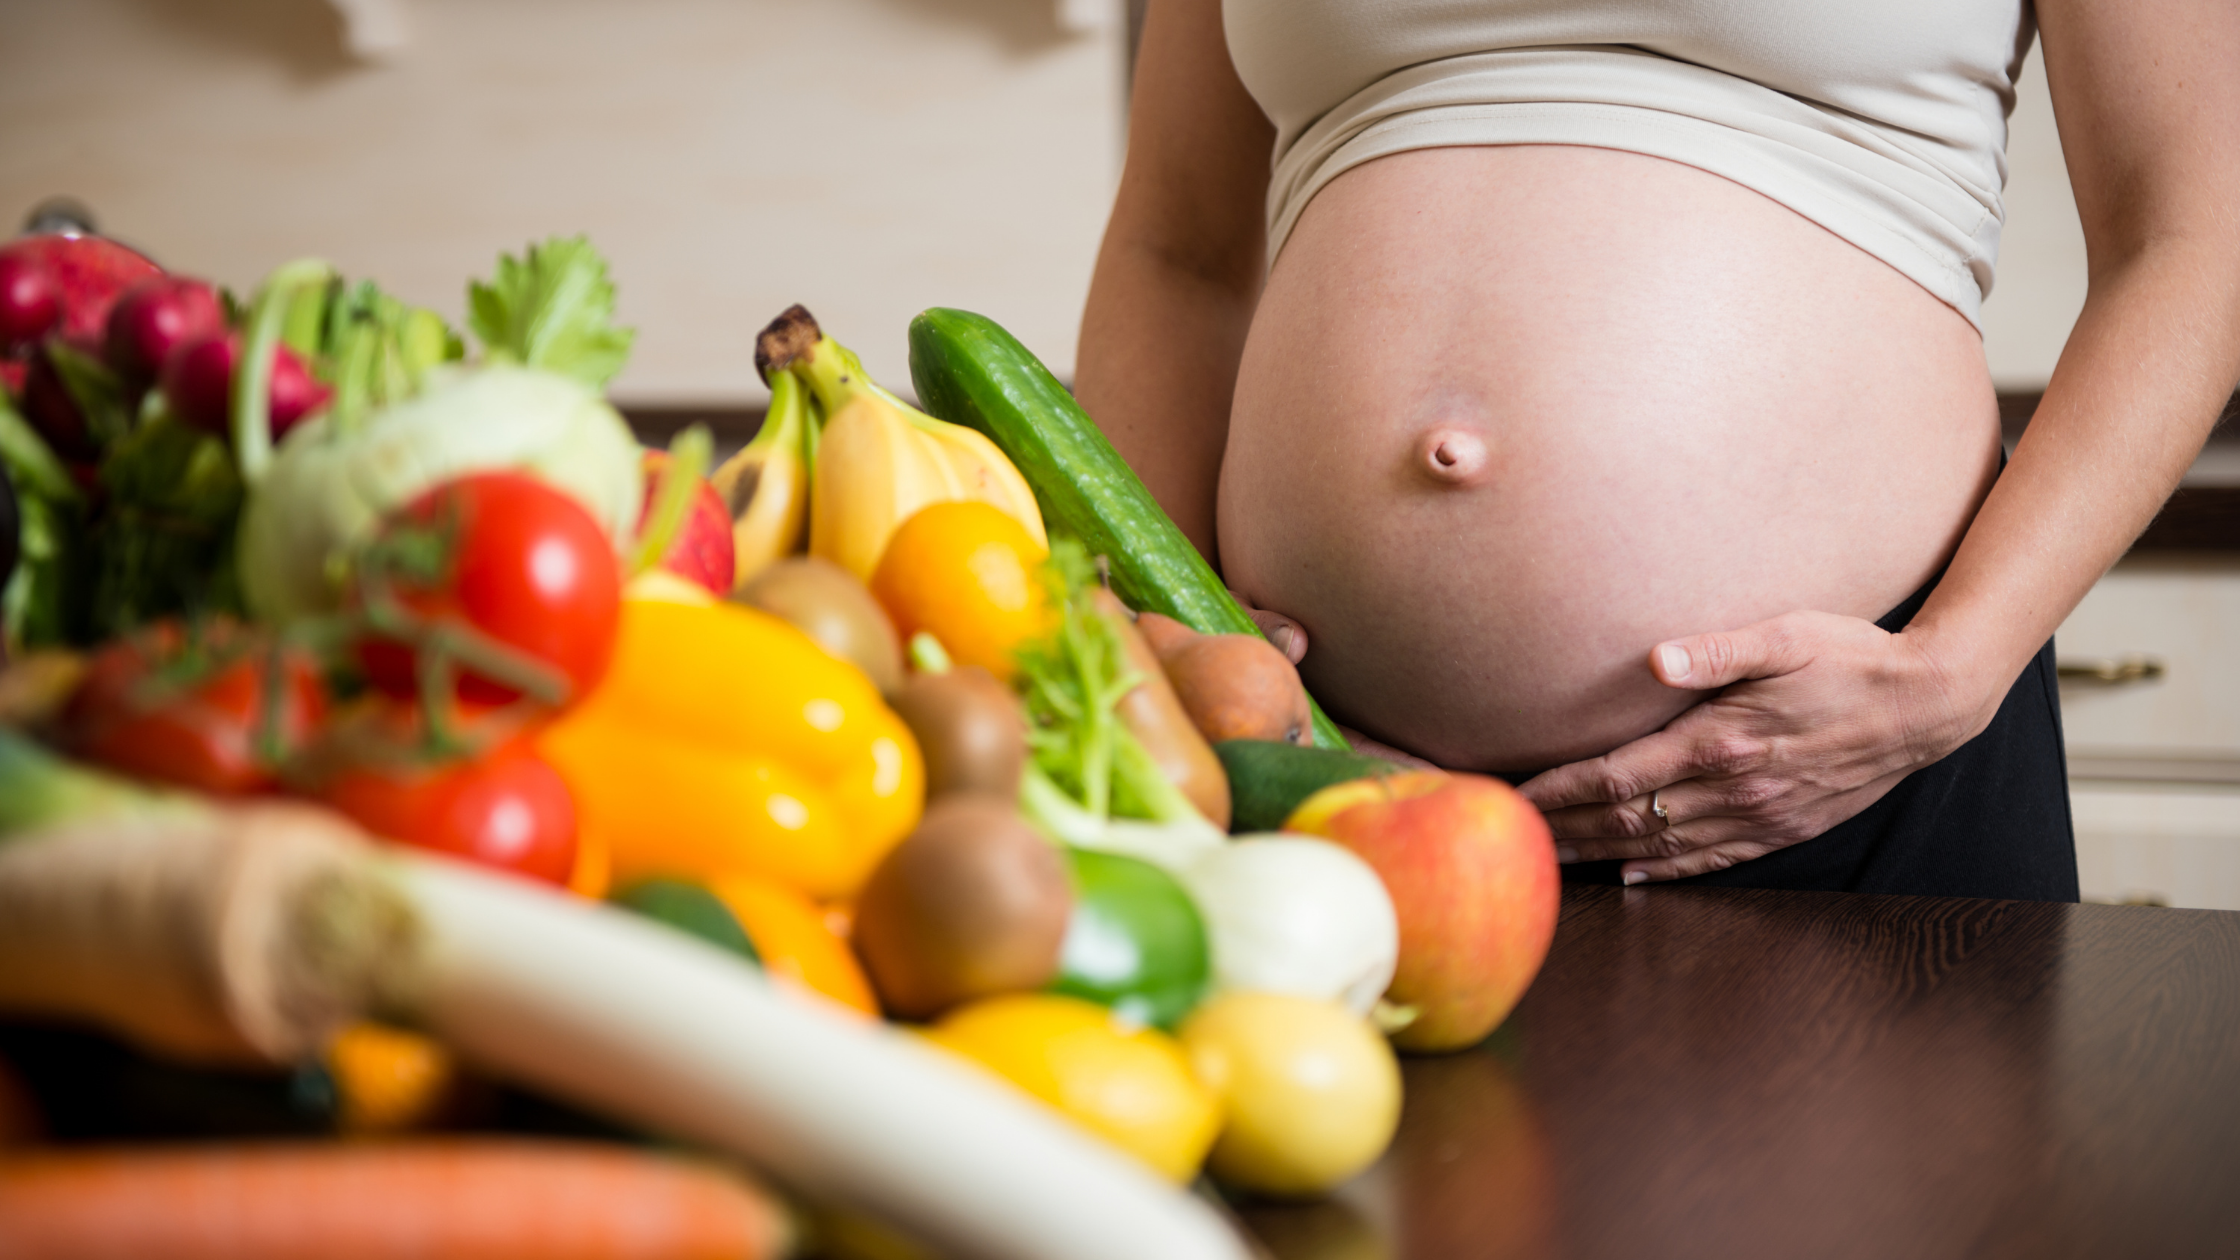 Top 10 Foods To Eat During Pregnancy To Make Your Baby Smart And Intelligent